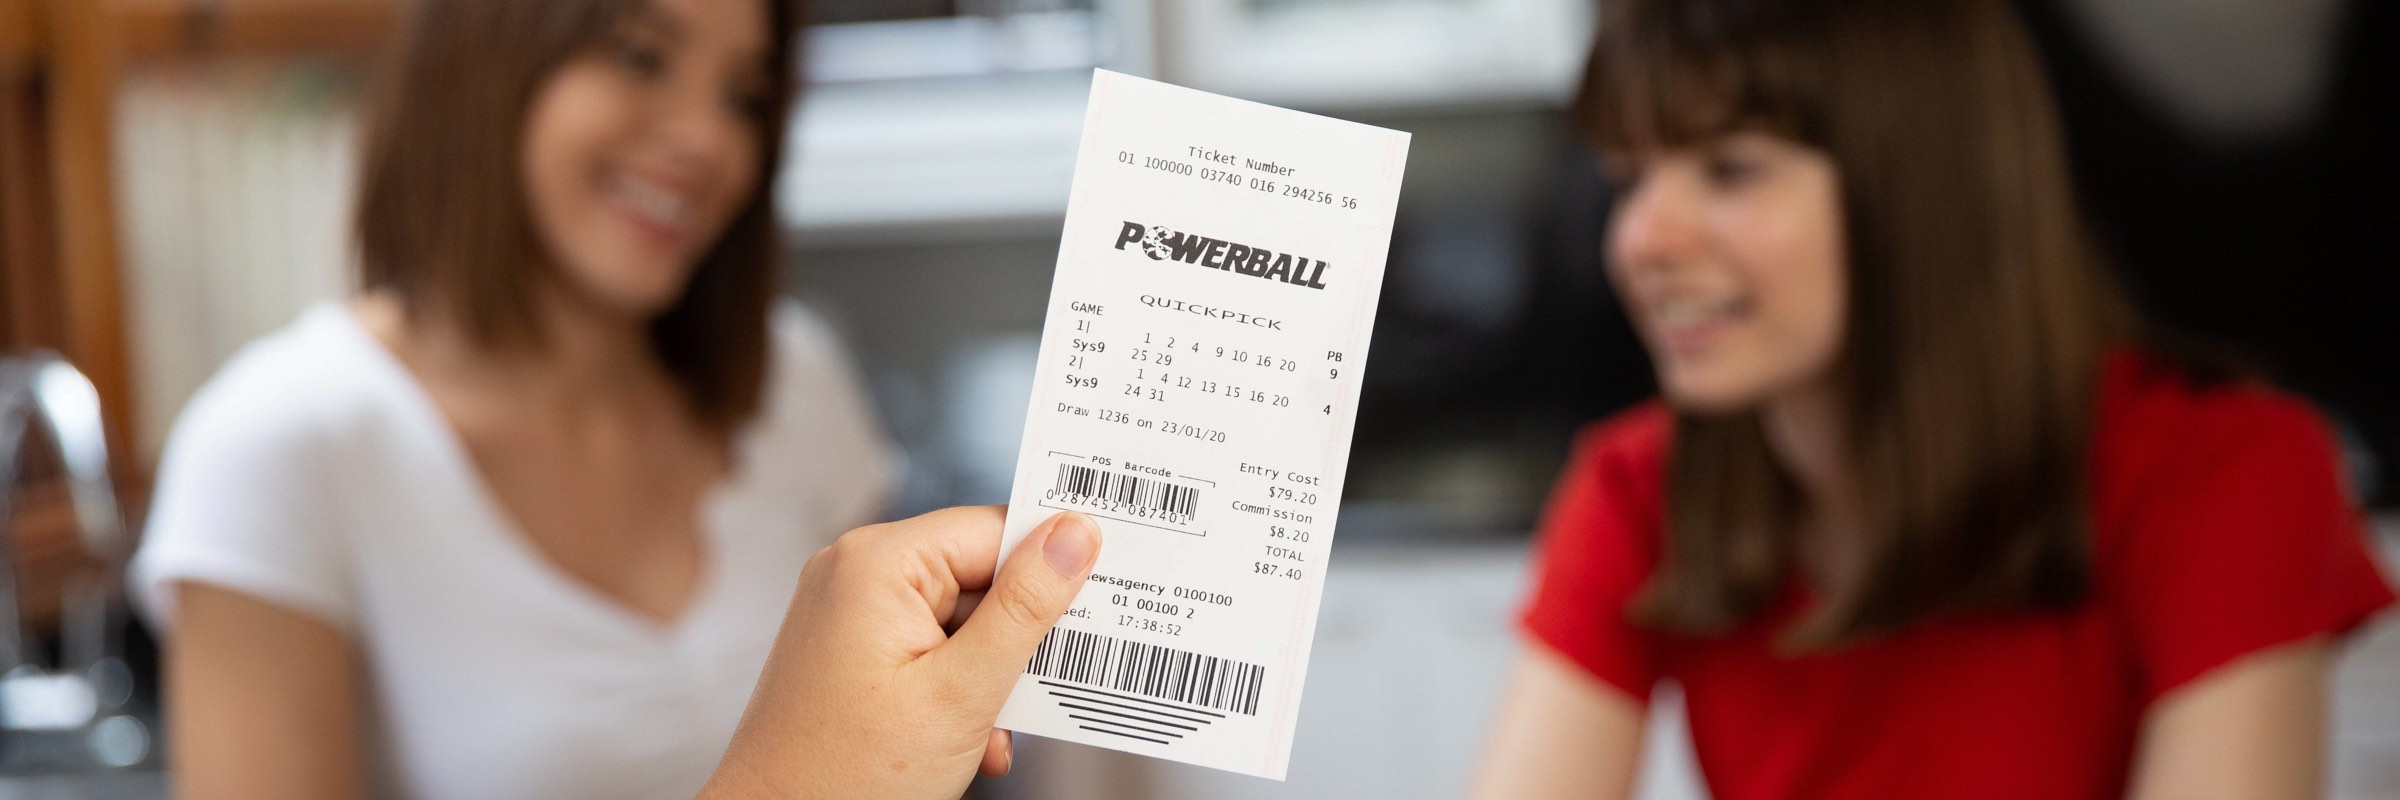 Lane Cove woman awakes to $30 million Powerball surprise | Real Winners by  The Lott